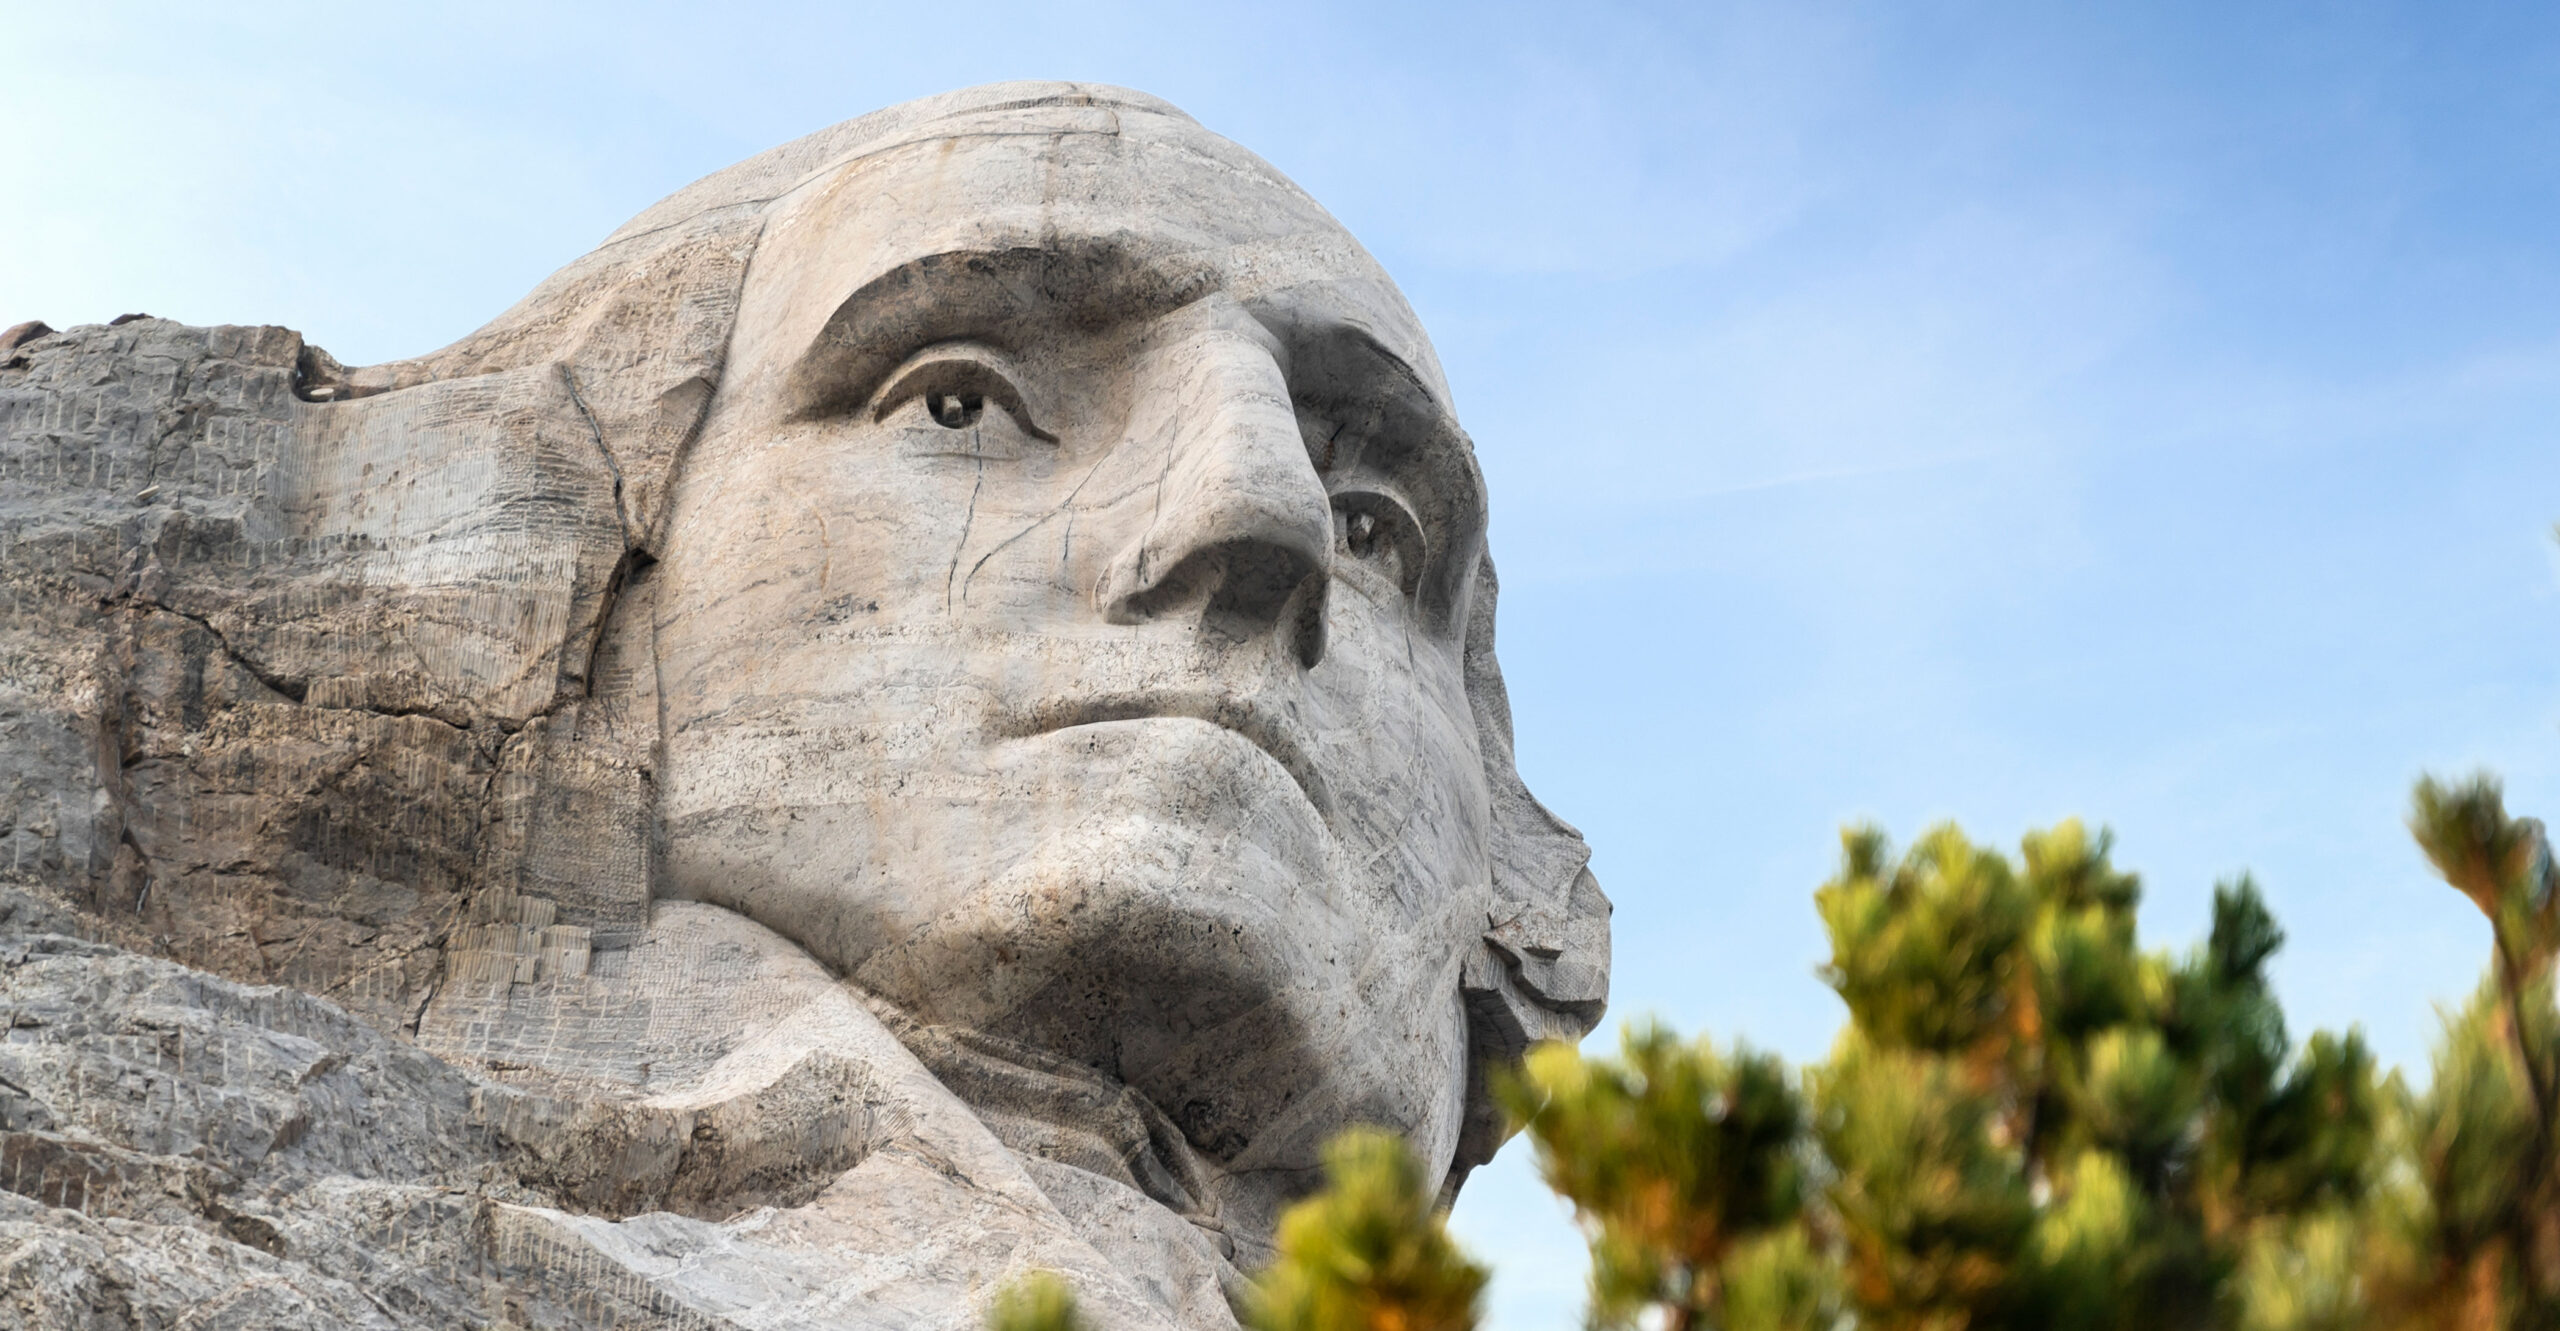 Presidents Day Reflections on George Washington’s American Character